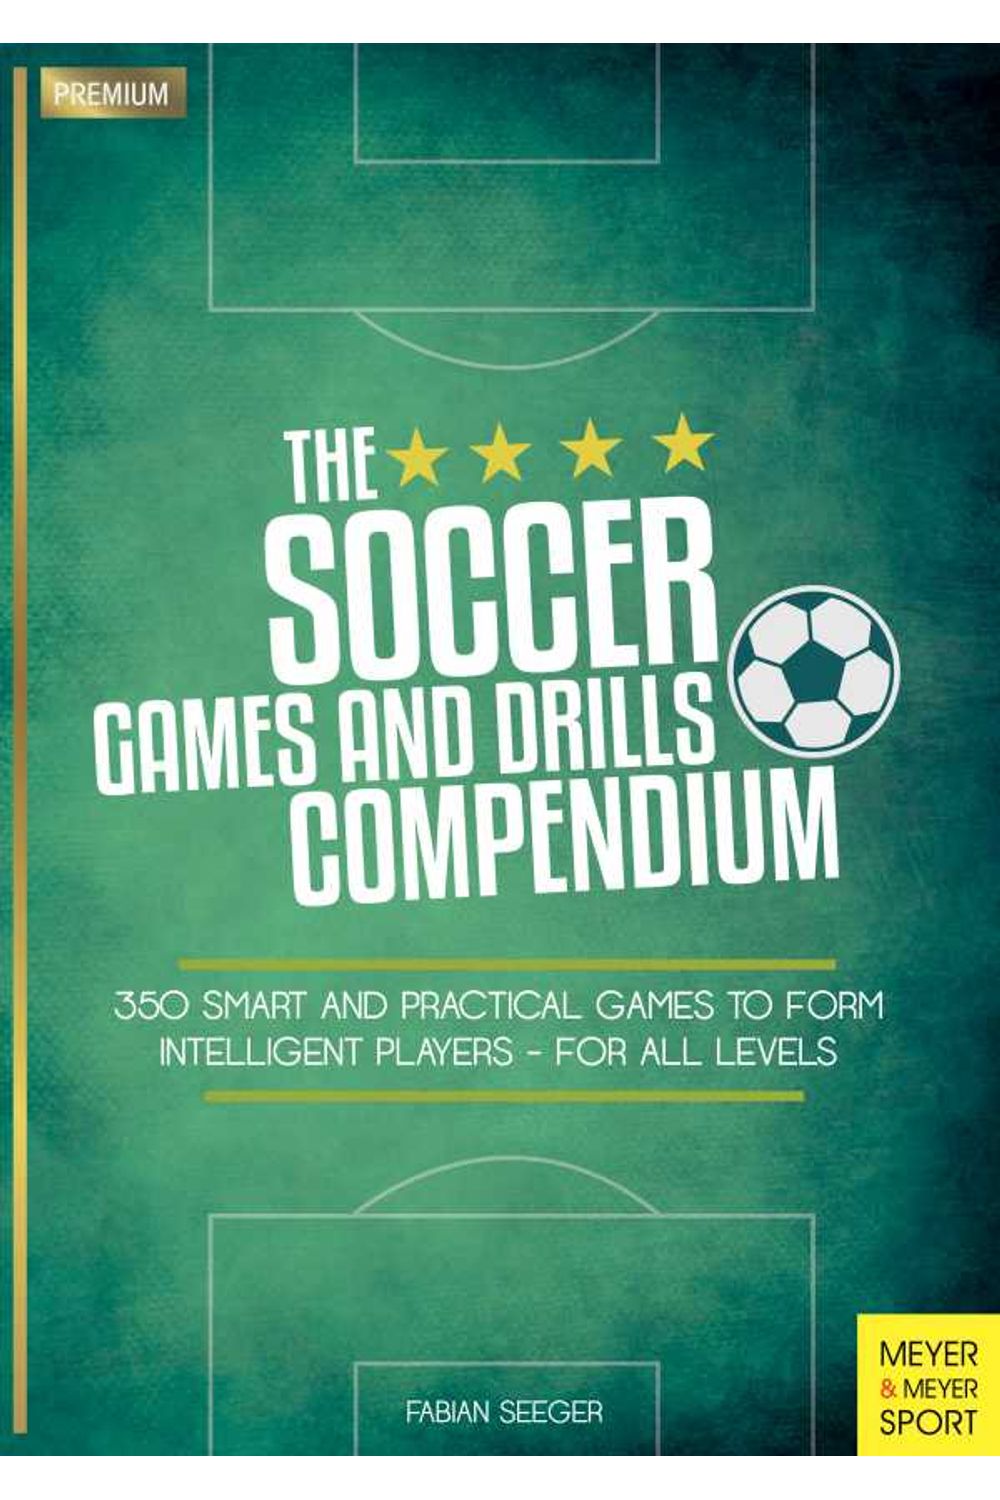 bw-the-soccer-games-and-drills-compendium-meyer-meyer-sport-9781782554448